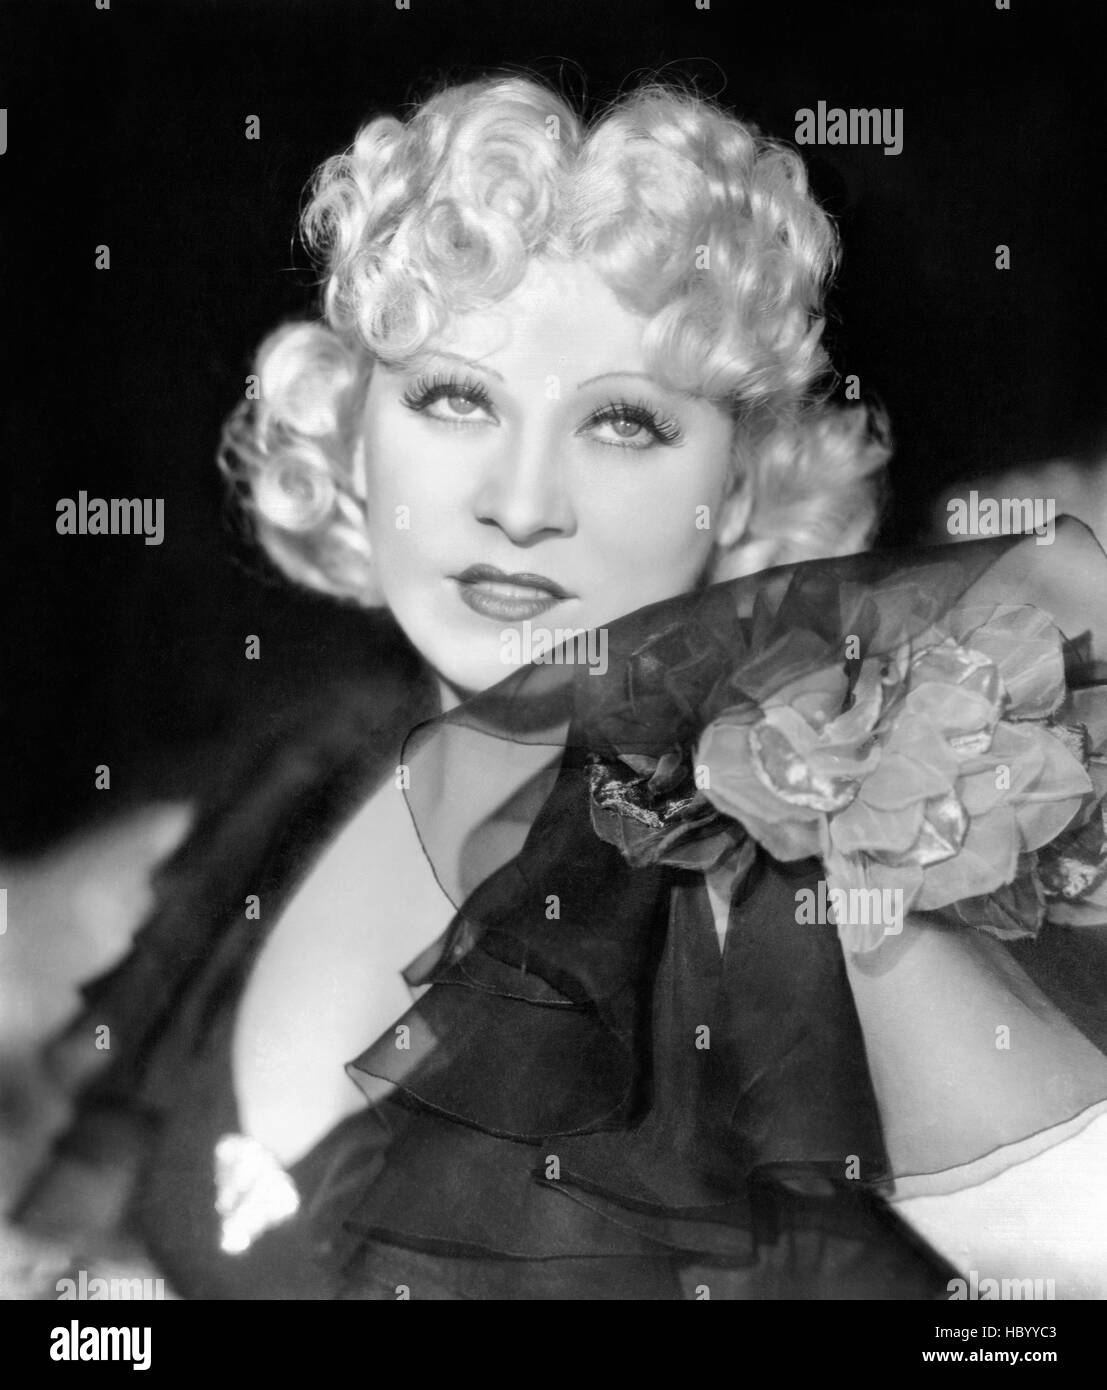 1933 Actress Mae West in "I'm No Angel" 4 Celebrity Photo Print 